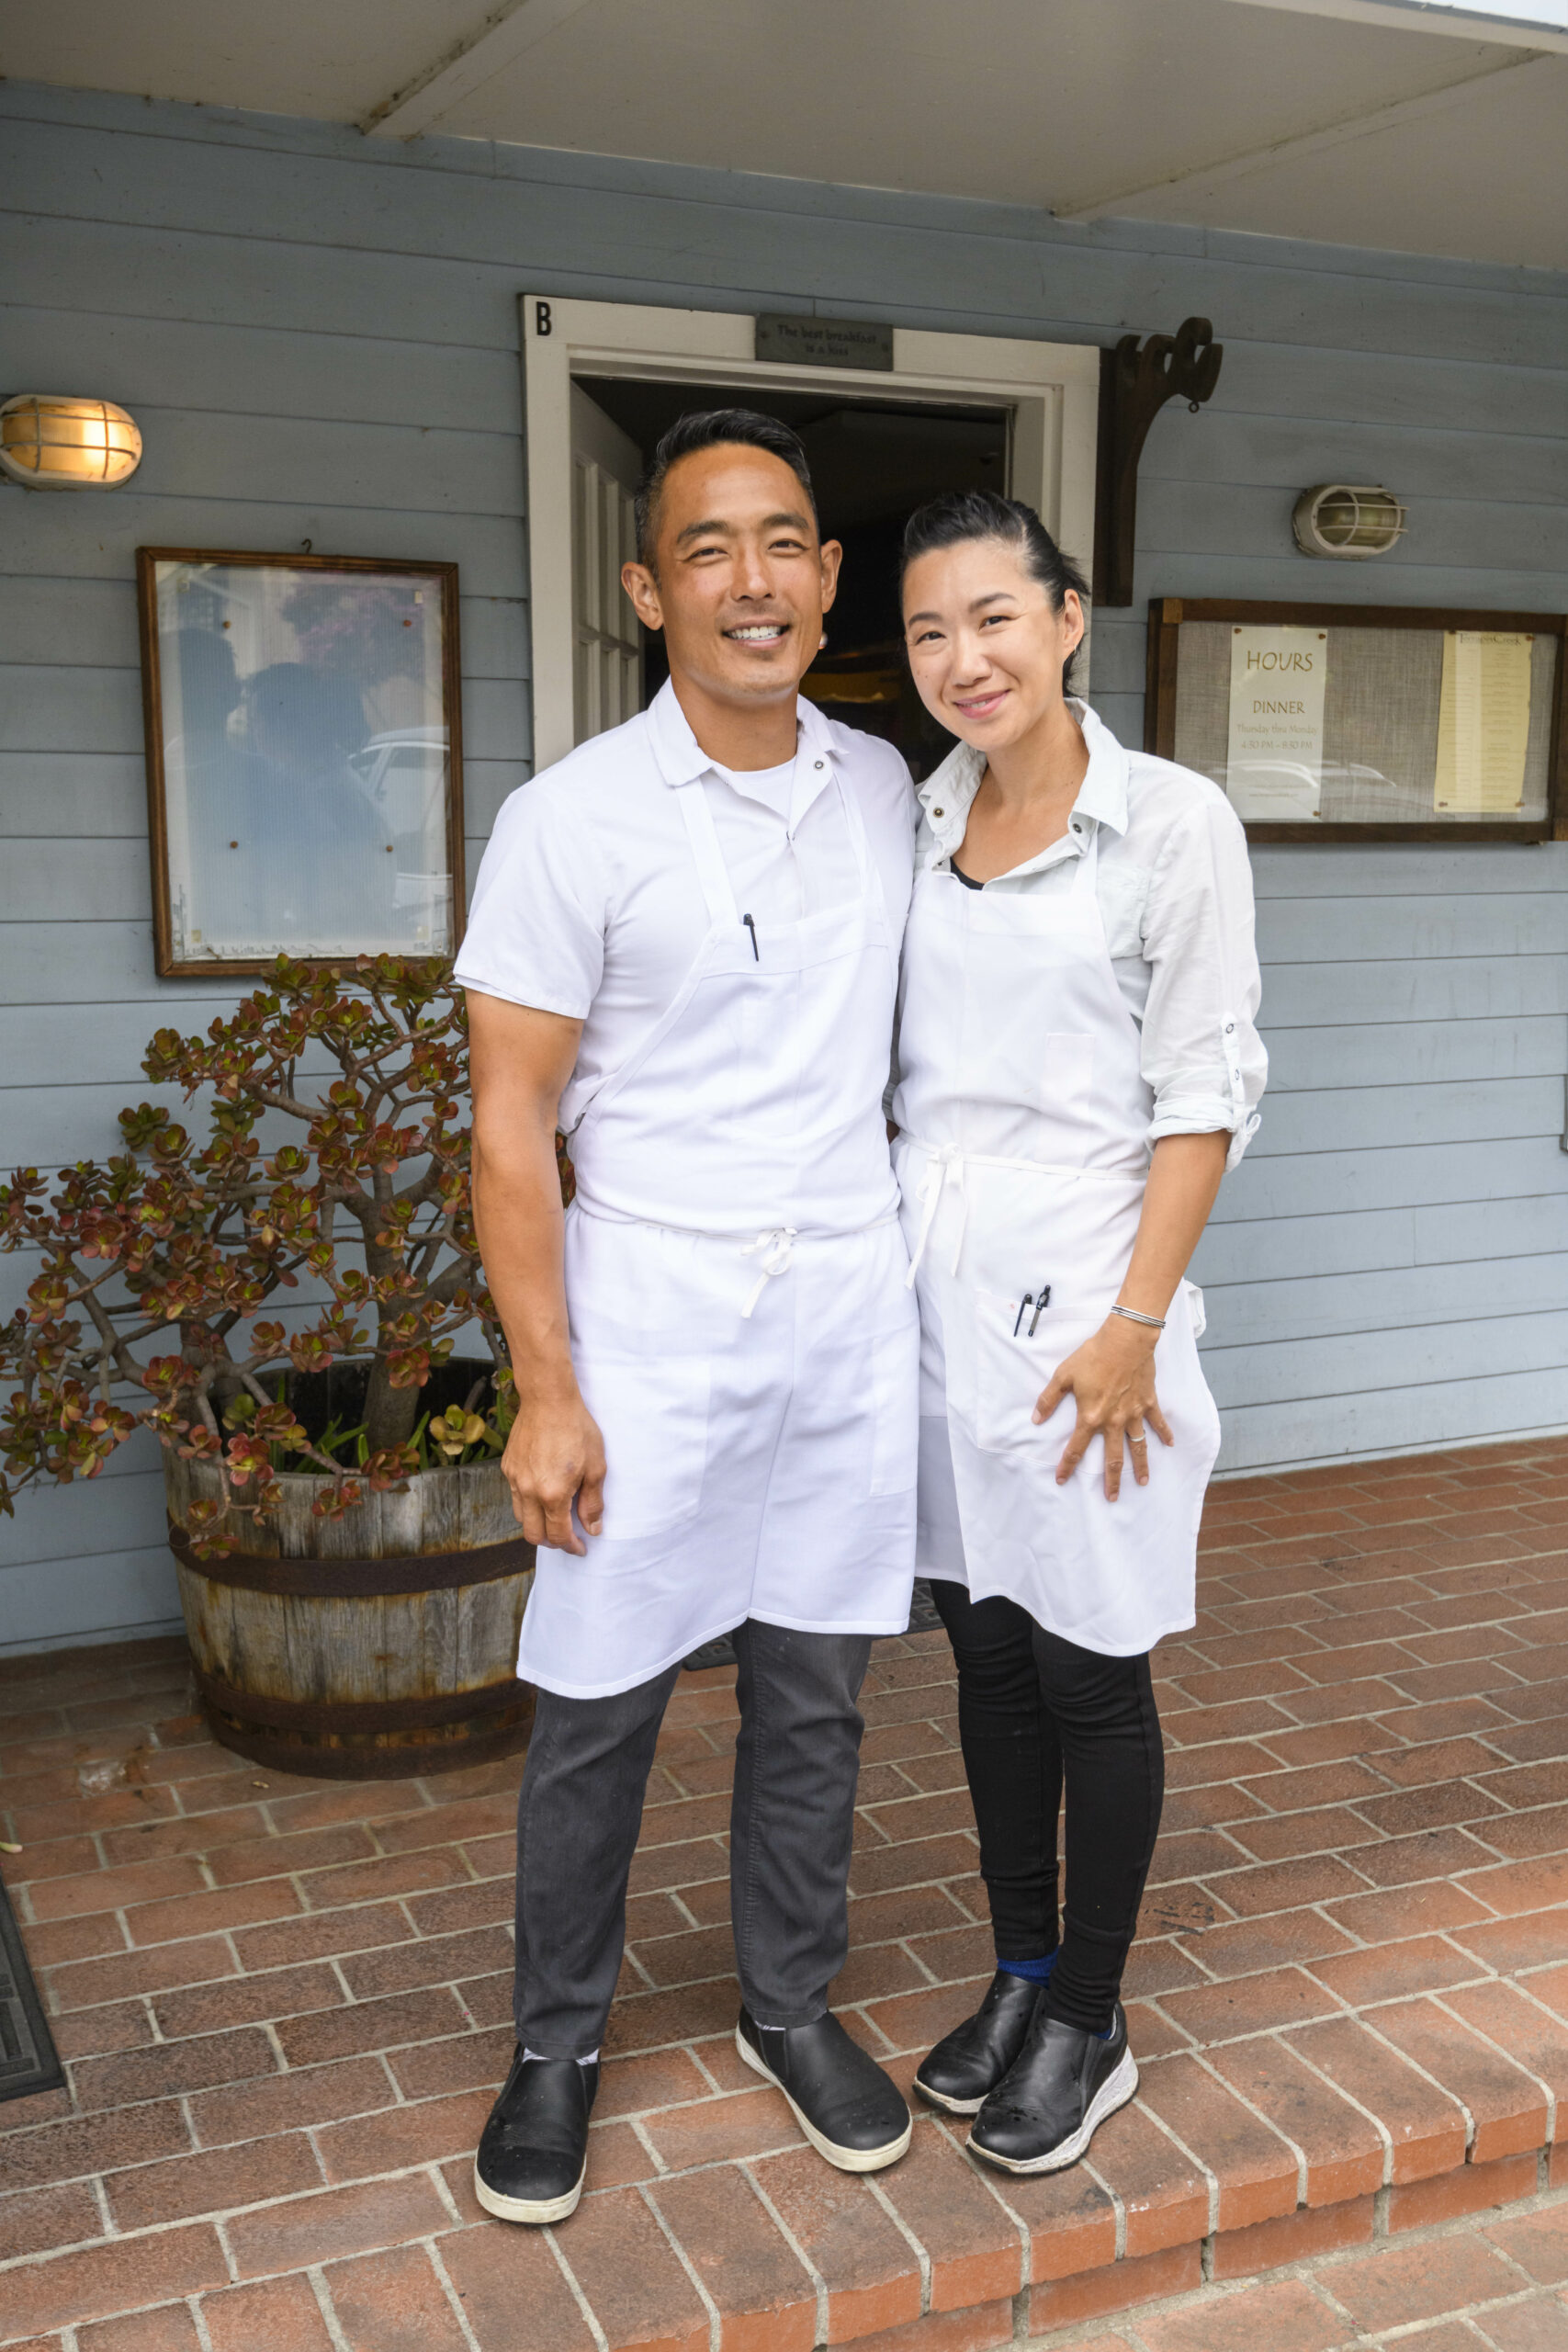 Chefs Andrew Truong and Liya Lin. (Jerry Dodrill)